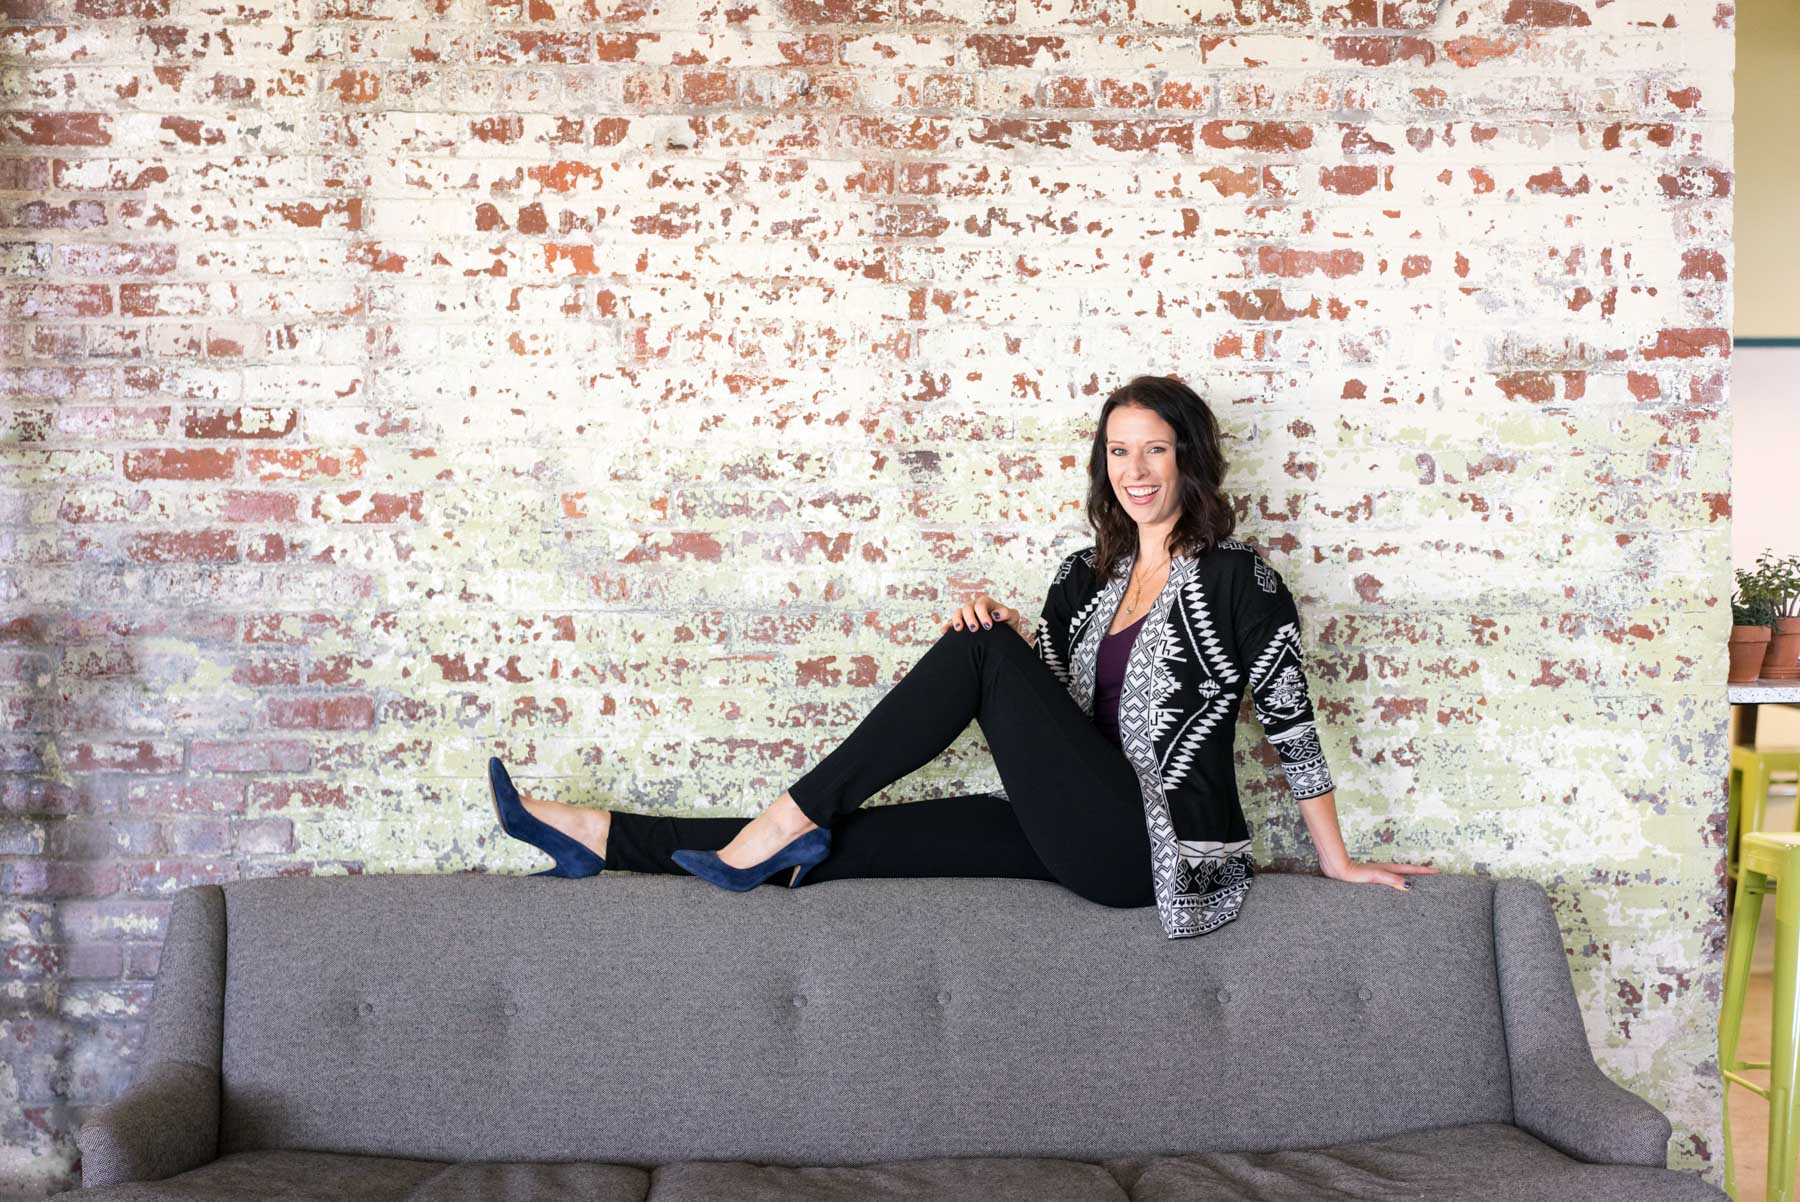 A woman displaying how to look confident in brand photos. She's posed atop a couch against a distressed brick wall wearing blue velvet heels and a black outfit. 